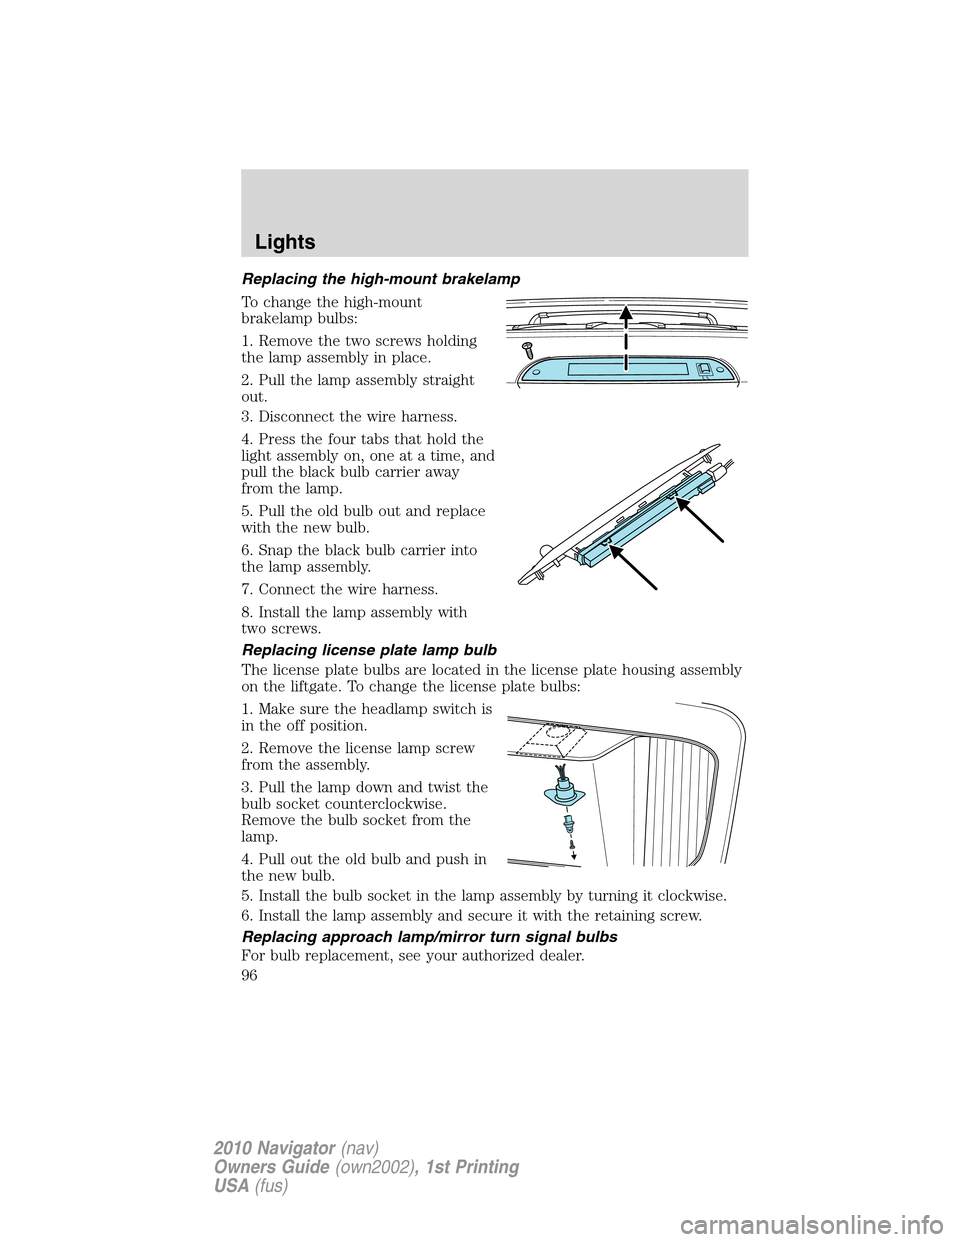 LINCOLN NAVIGATOR 2010  Owners Manual Replacing the high-mount brakelamp
To change the high-mount
brakelamp bulbs:
1. Remove the two screws holding
the lamp assembly in place.
2. Pull the lamp assembly straight
out.
3. Disconnect the wire